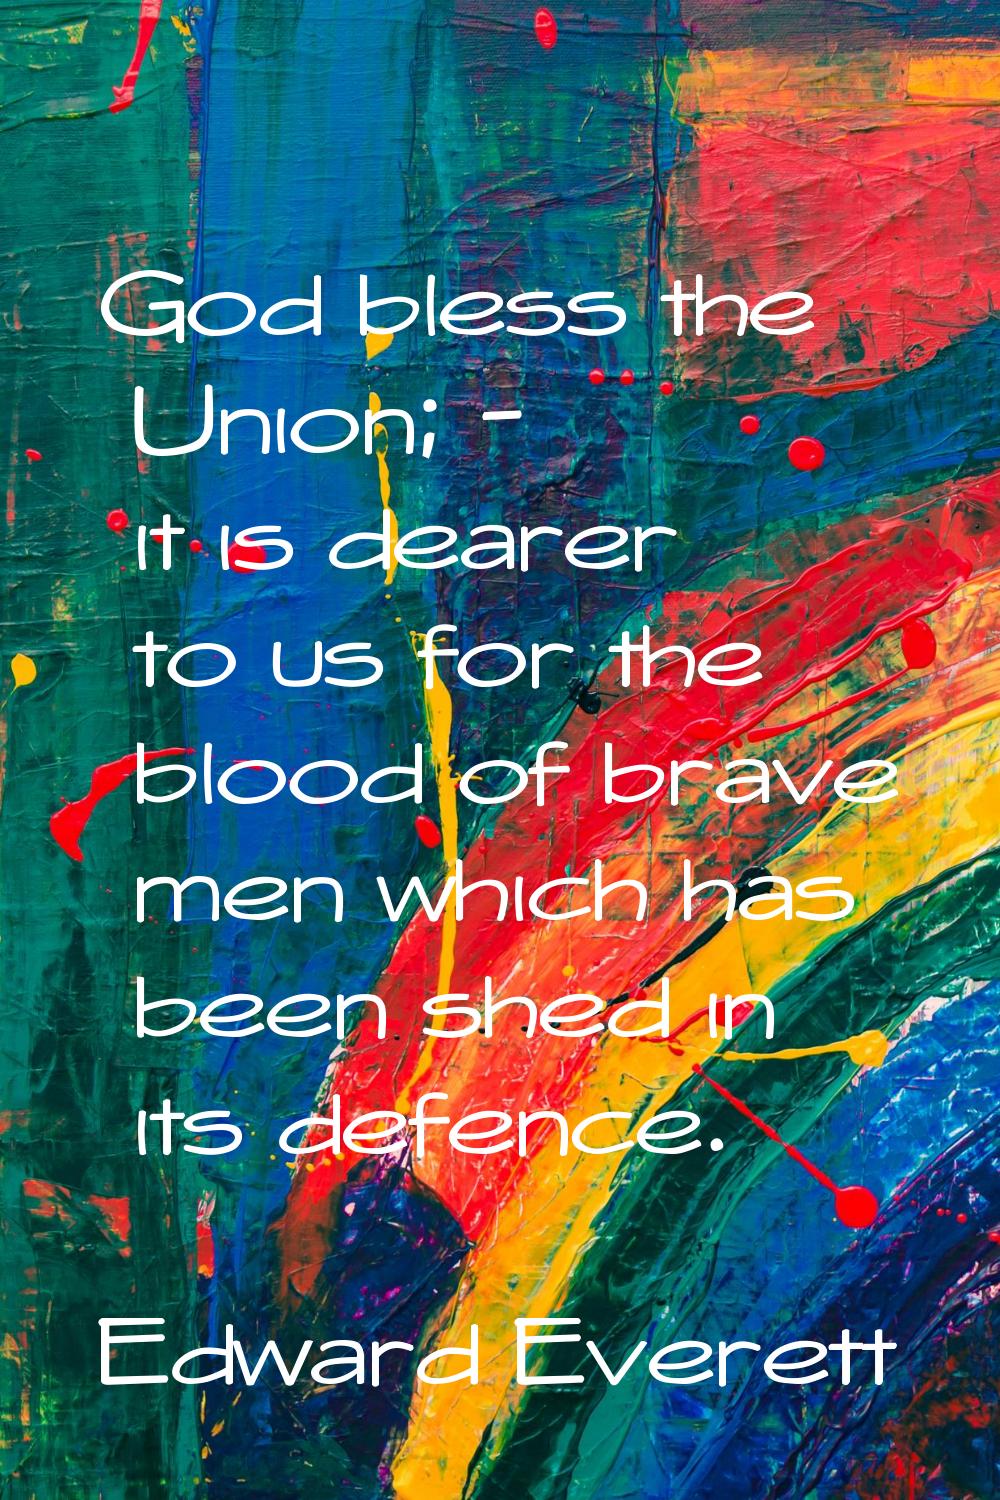 God bless the Union; - it is dearer to us for the blood of brave men which has been shed in its def